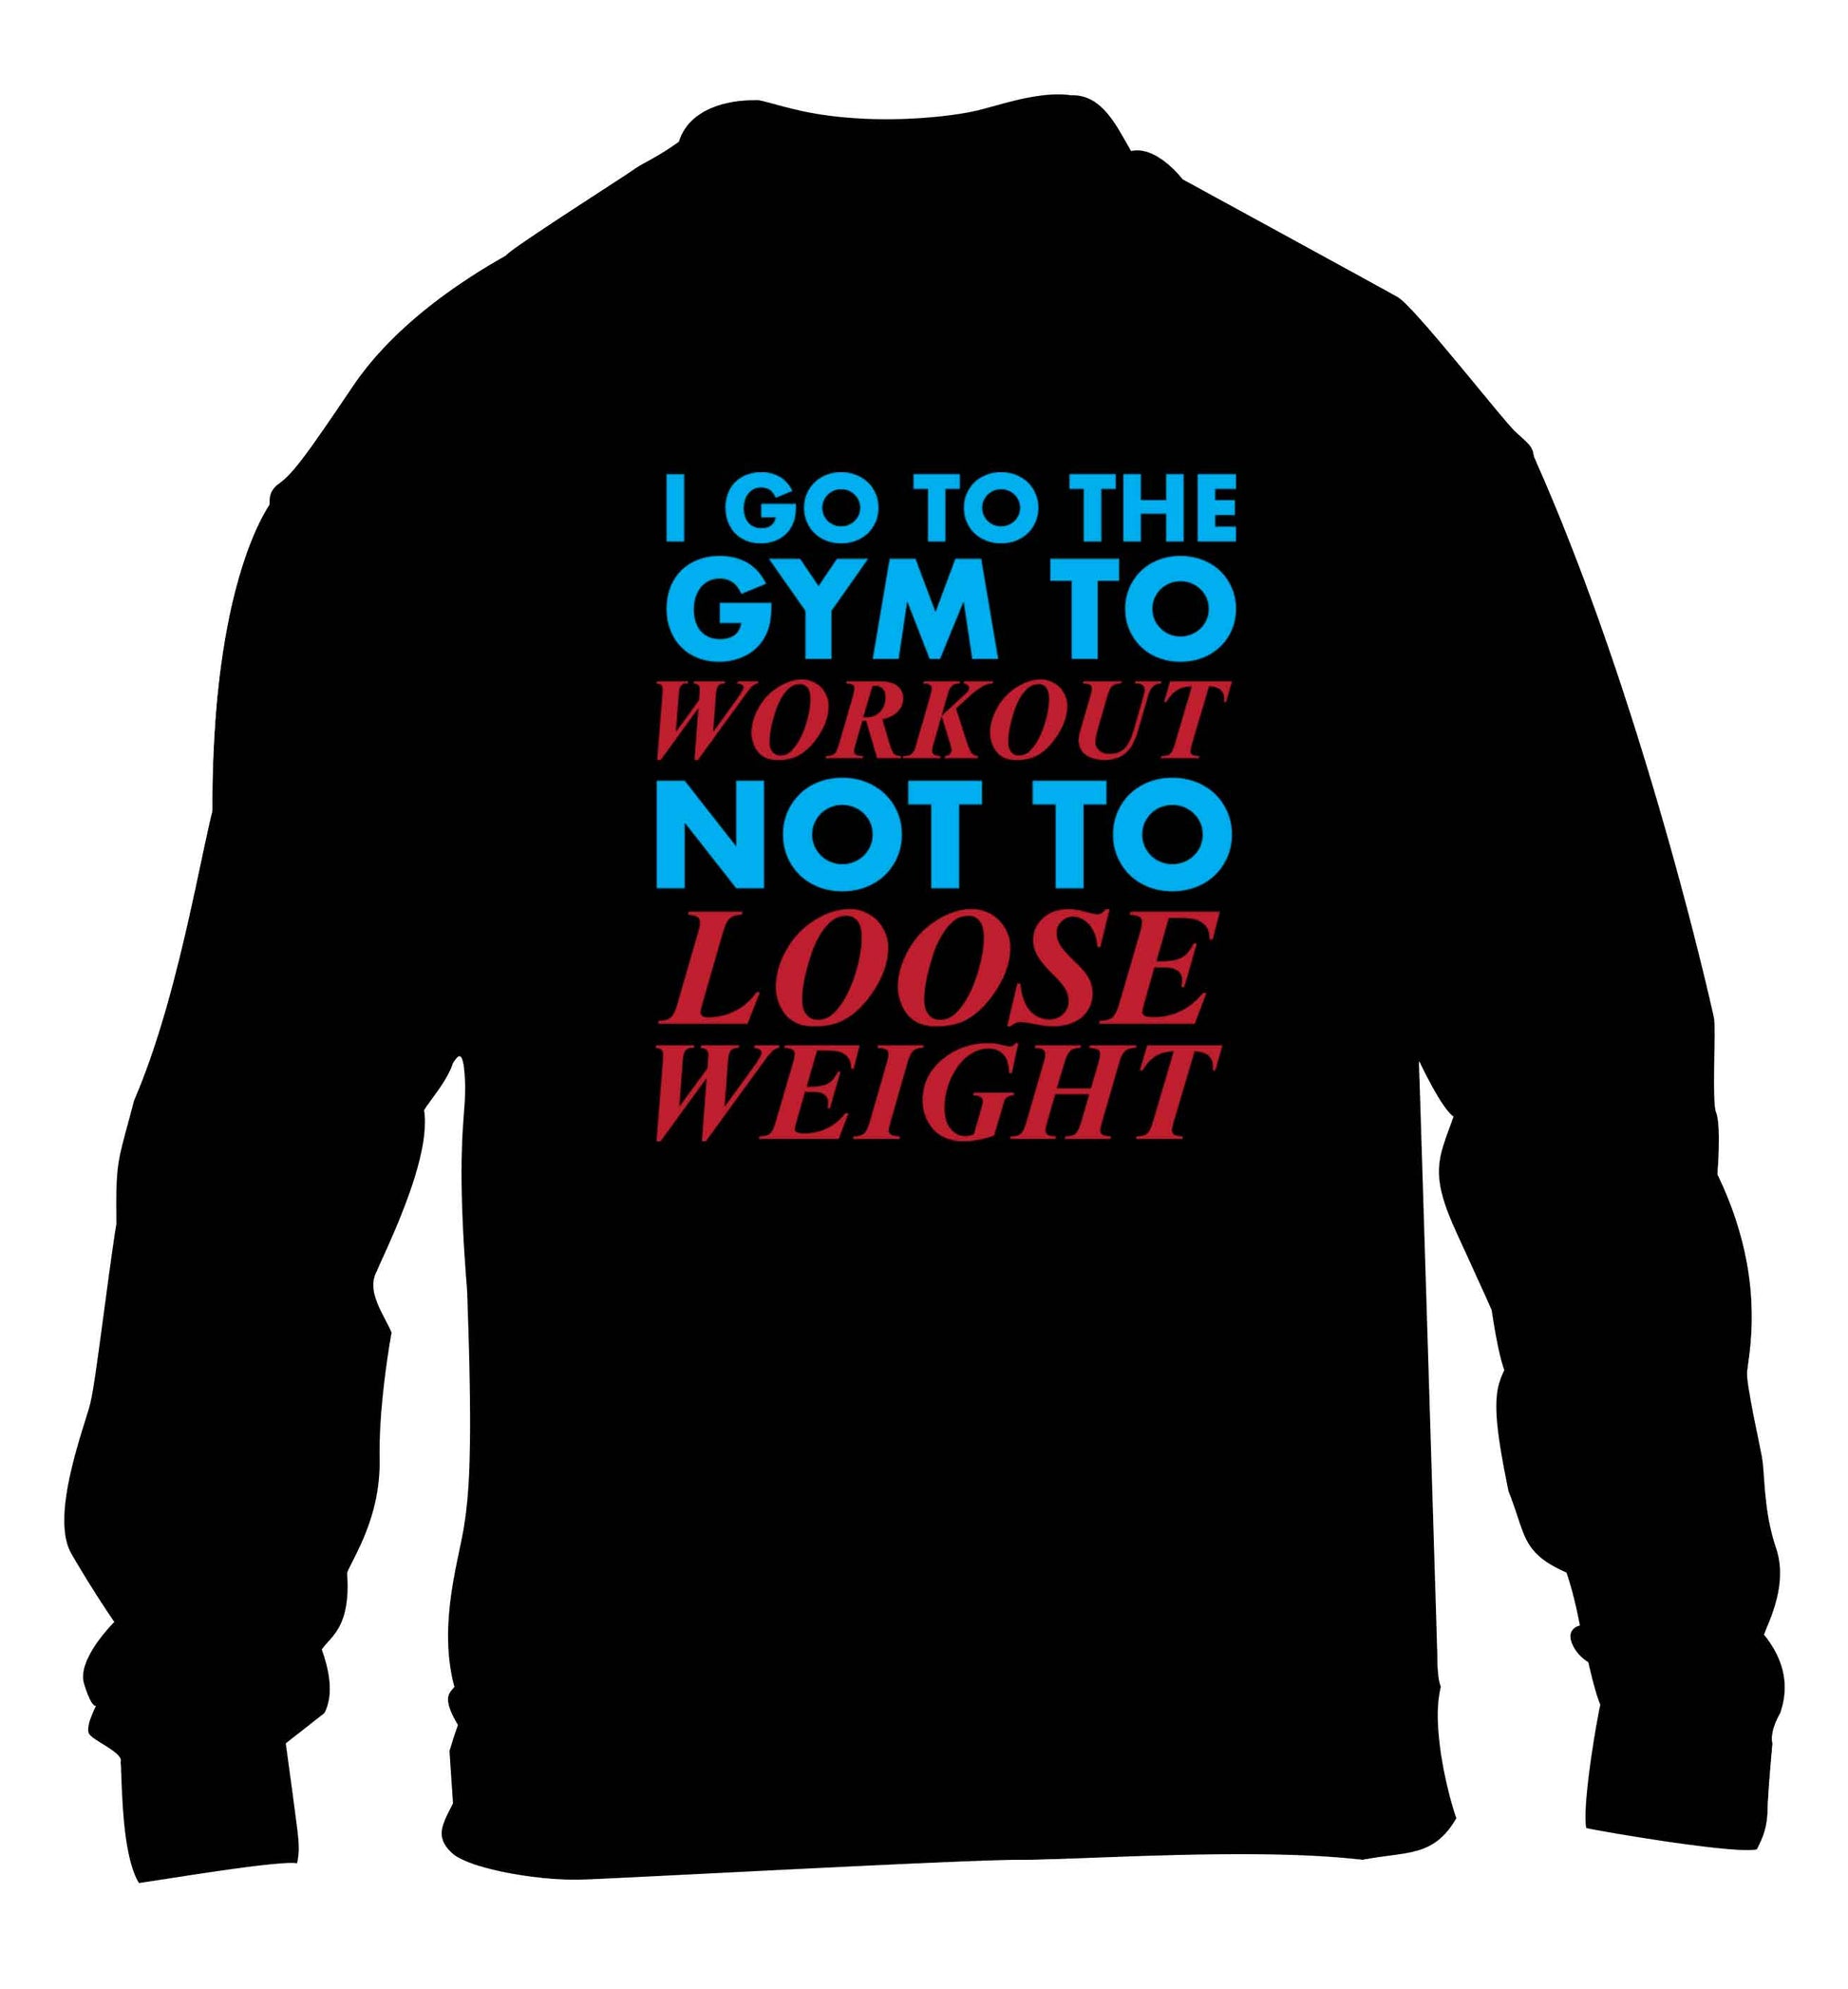 I go to the gym to workout not to loose weight children's black sweater 12-13 Years